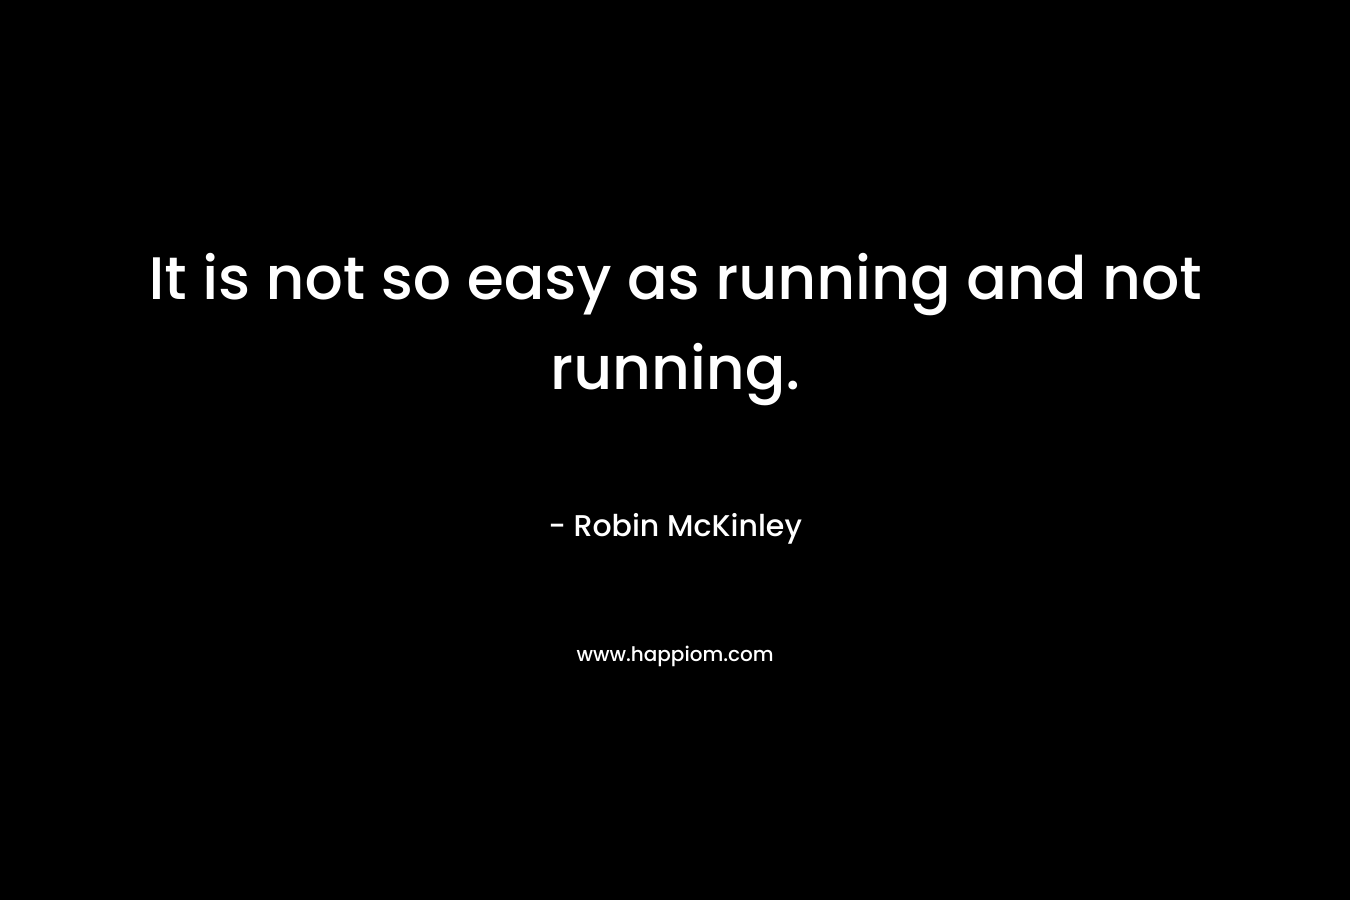 It is not so easy as running and not running.